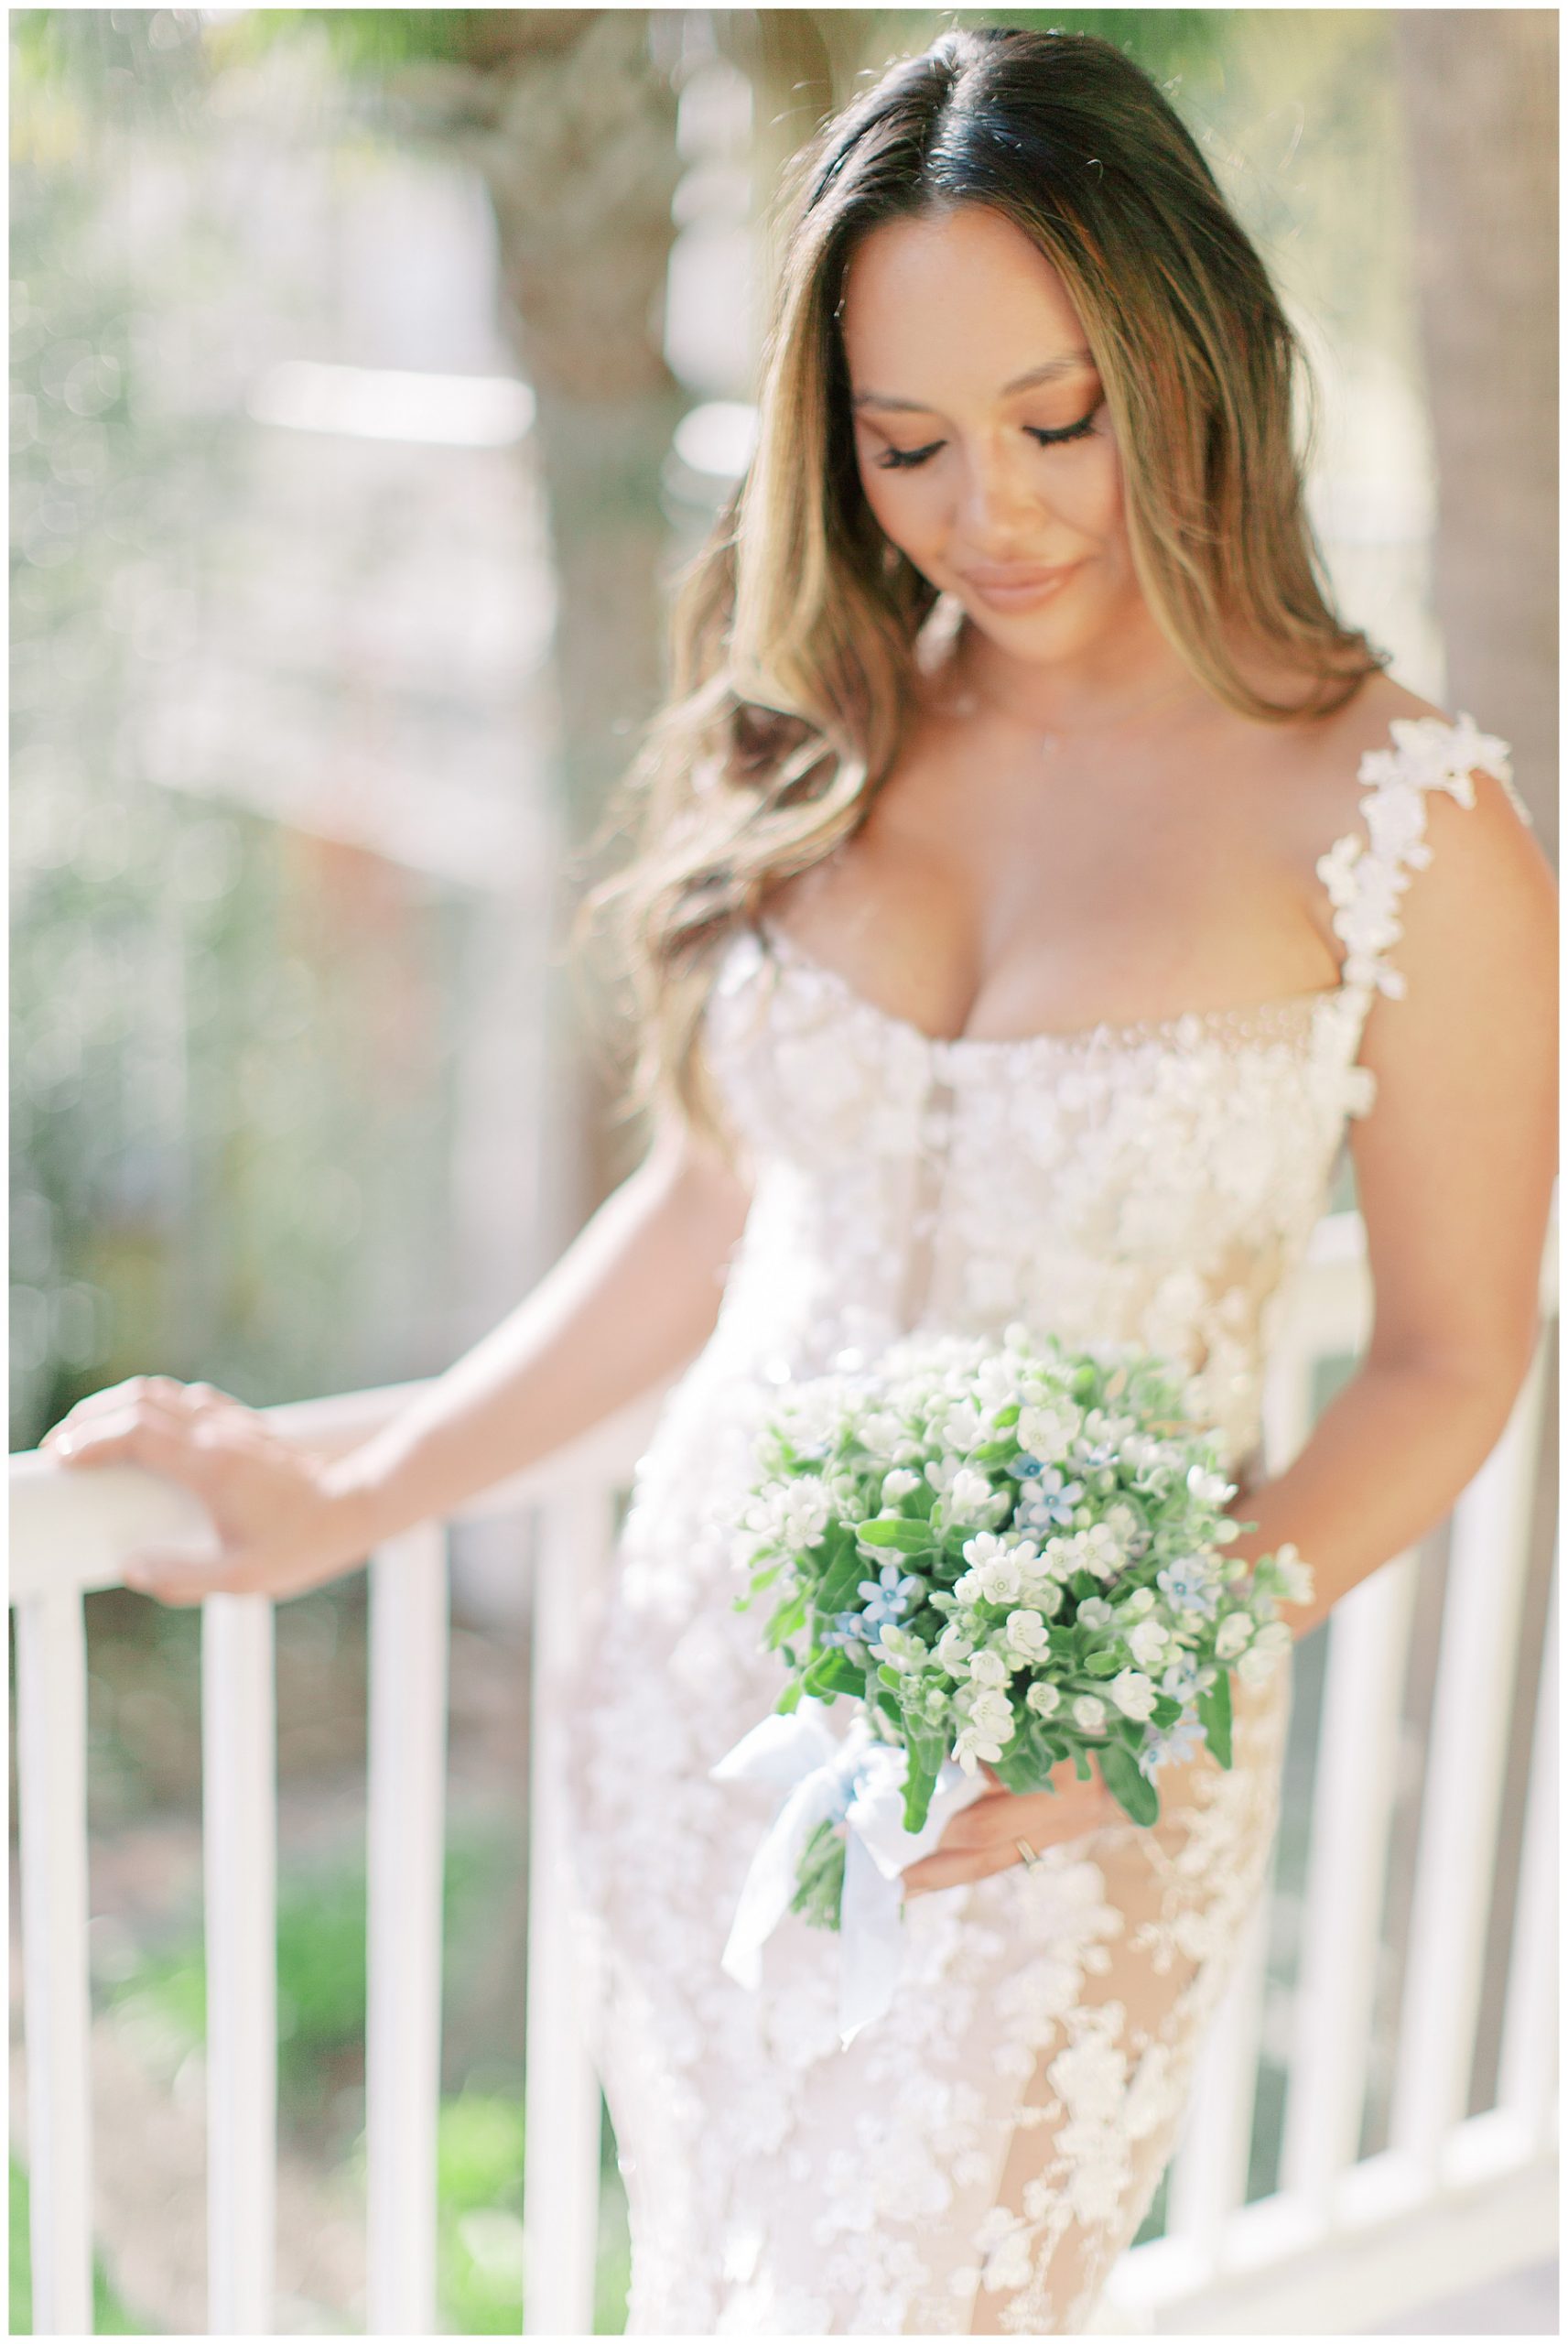 bride looks down at small bouquet of white and blue flowers with white ribbon while holding railing of porch outside the William Aiken House